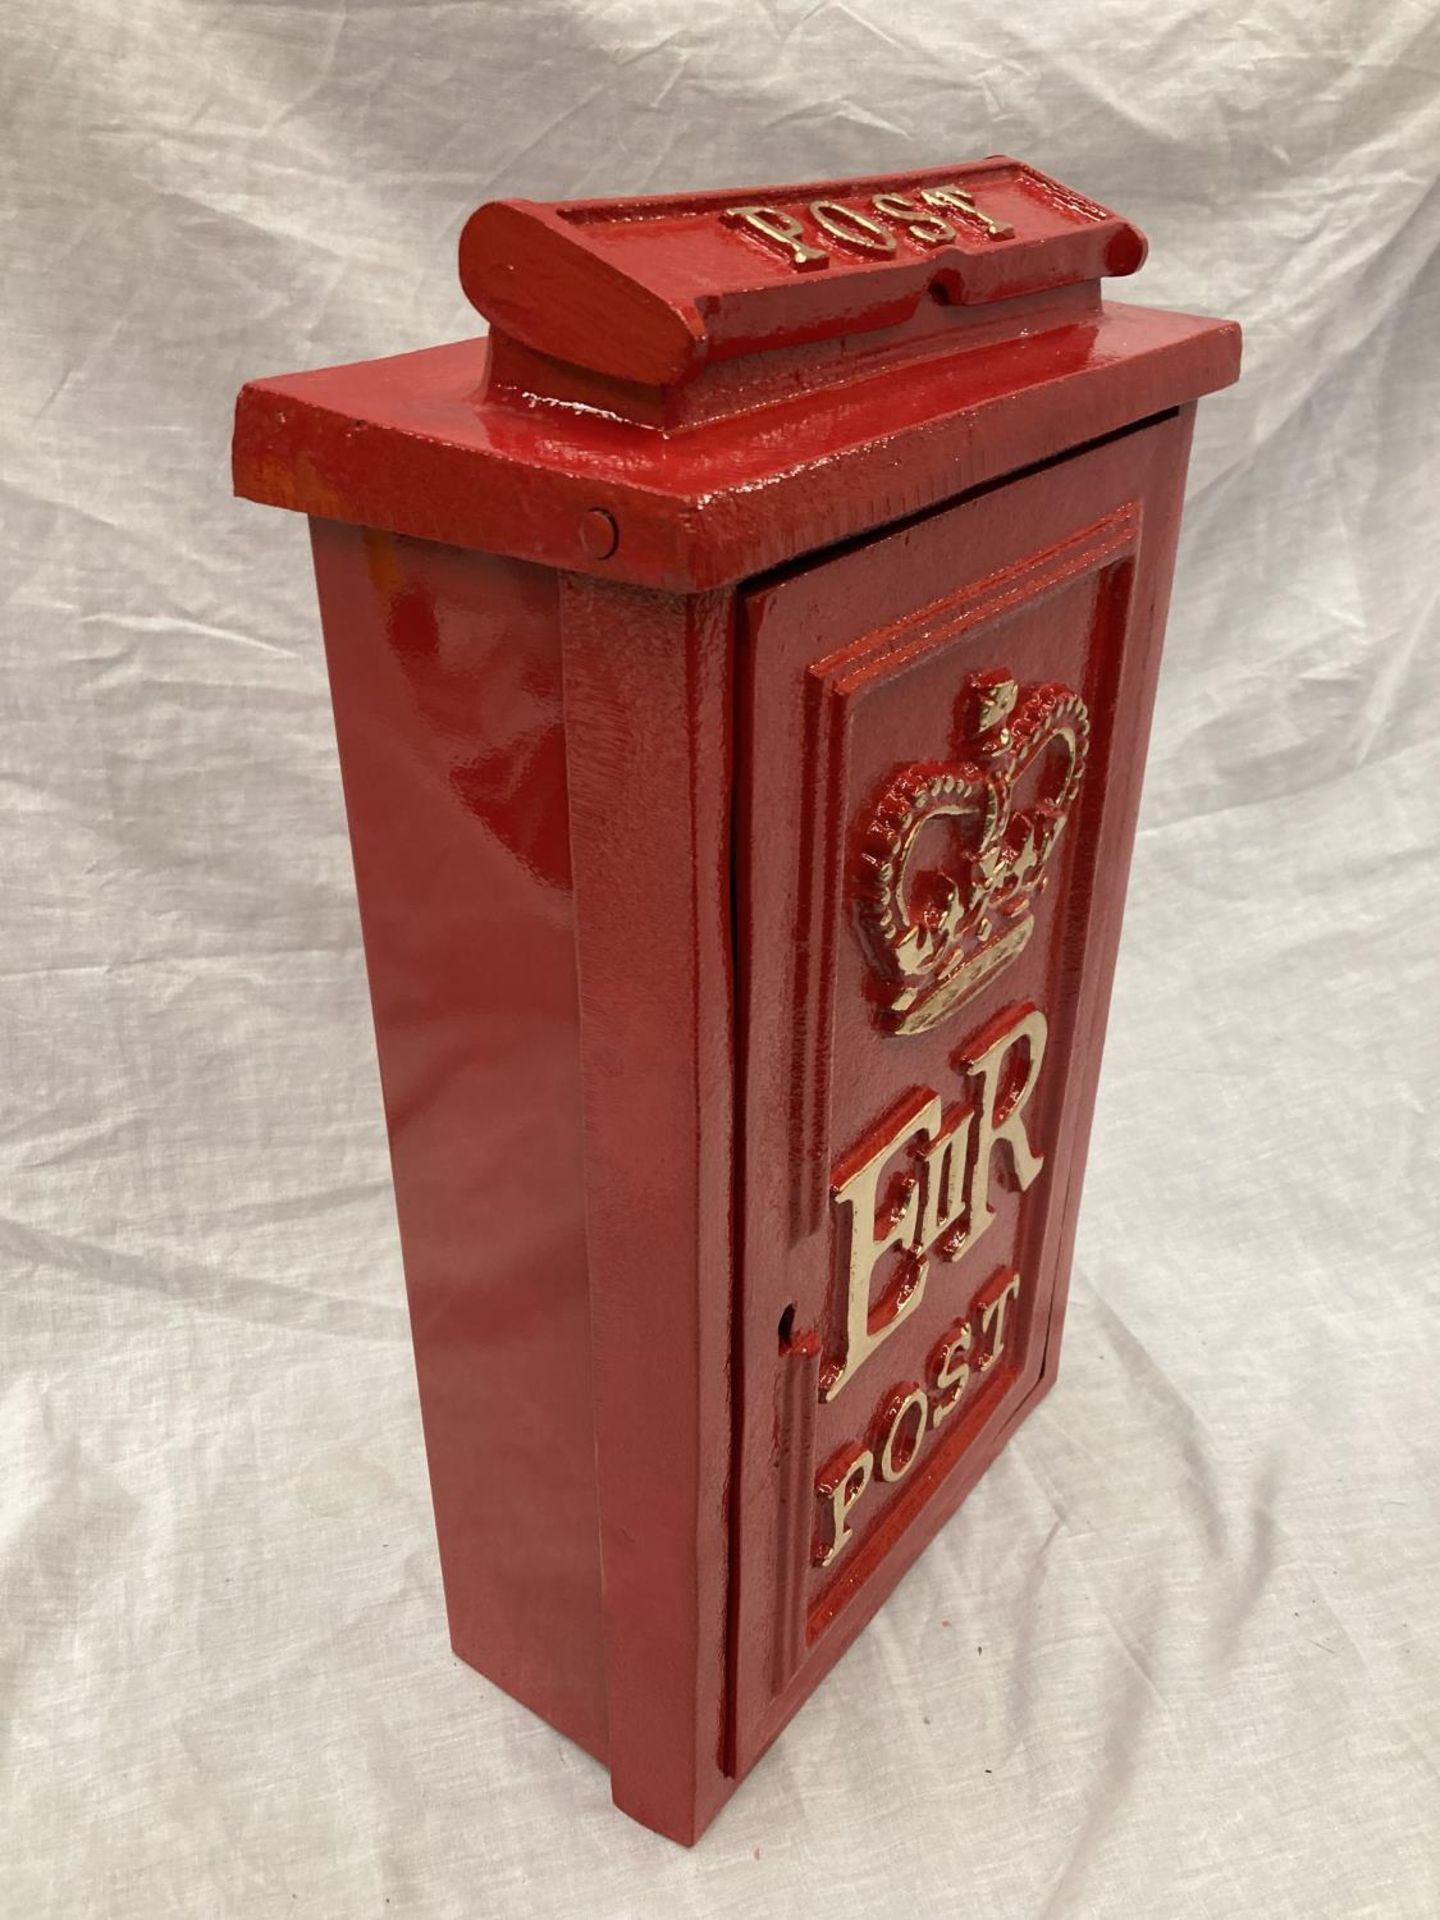 A RED CAST WALL MOUNTED POST BOX WITH KEYS - Image 5 of 5